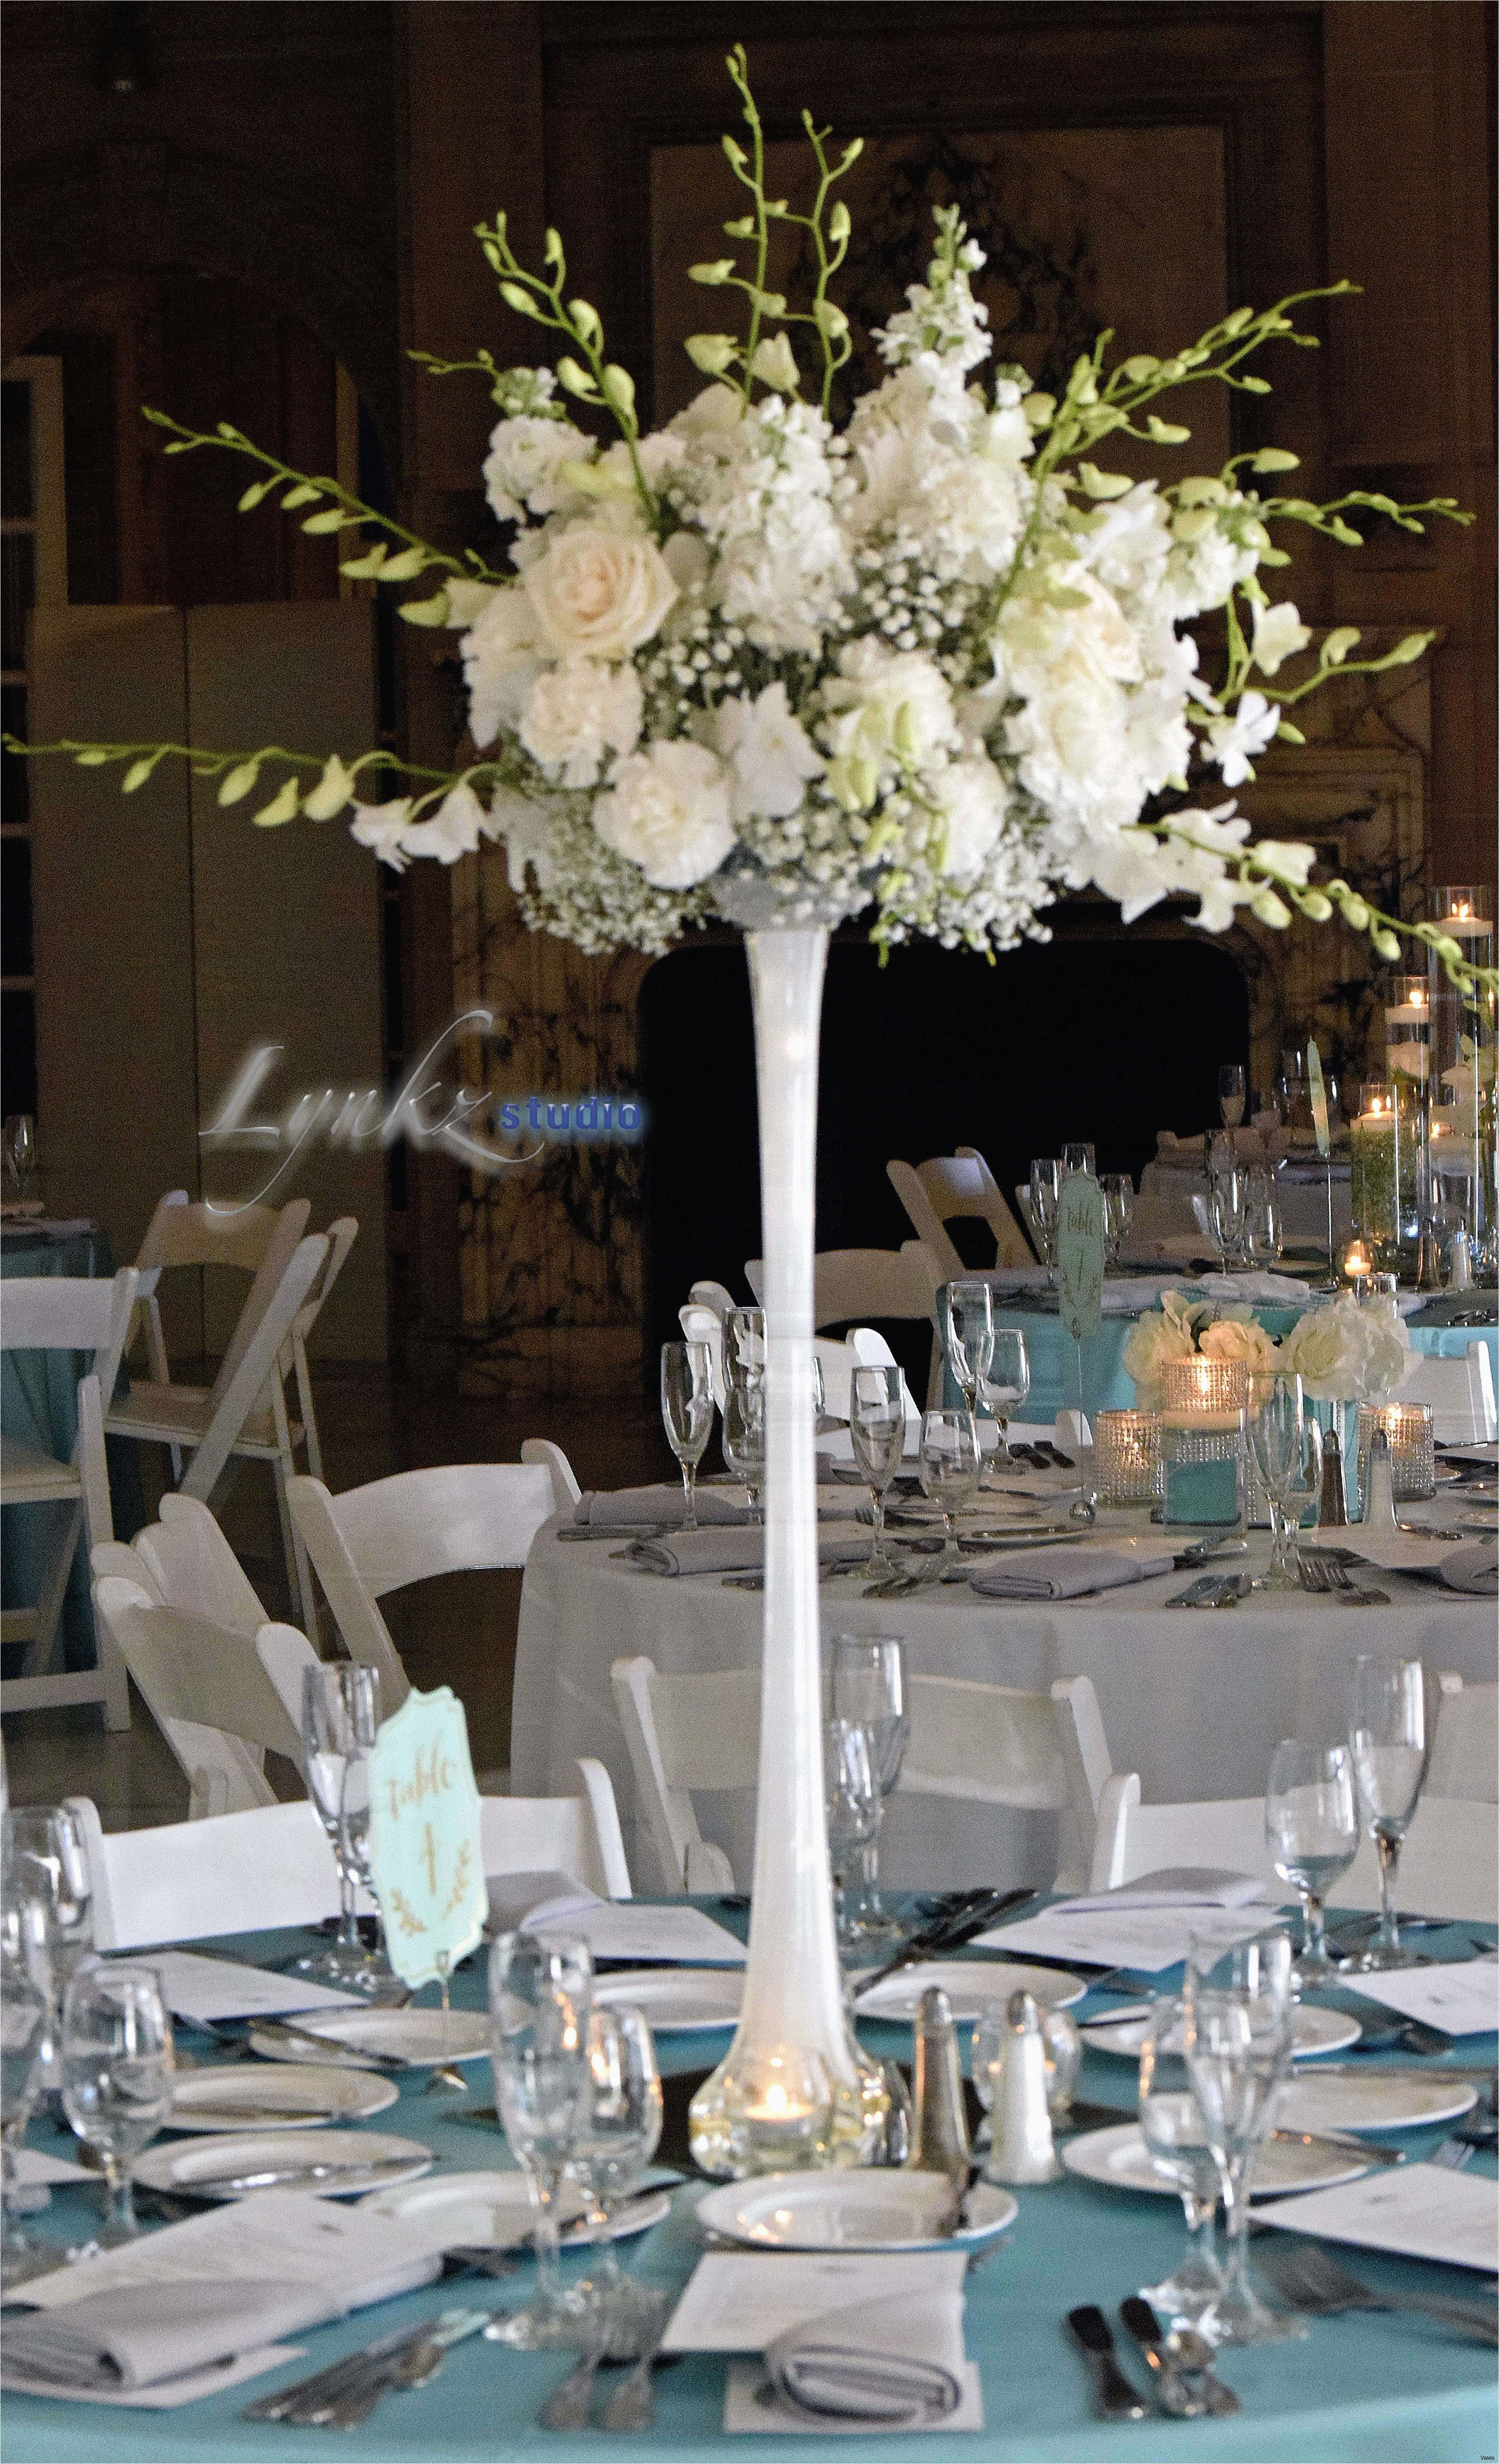 silver floral vase of room decor ideas with lights luxury vases eiffel tower vase lights with room decor ideas with lights idea vases eiffel tower vase lights hydrangea with grass vasei 0d